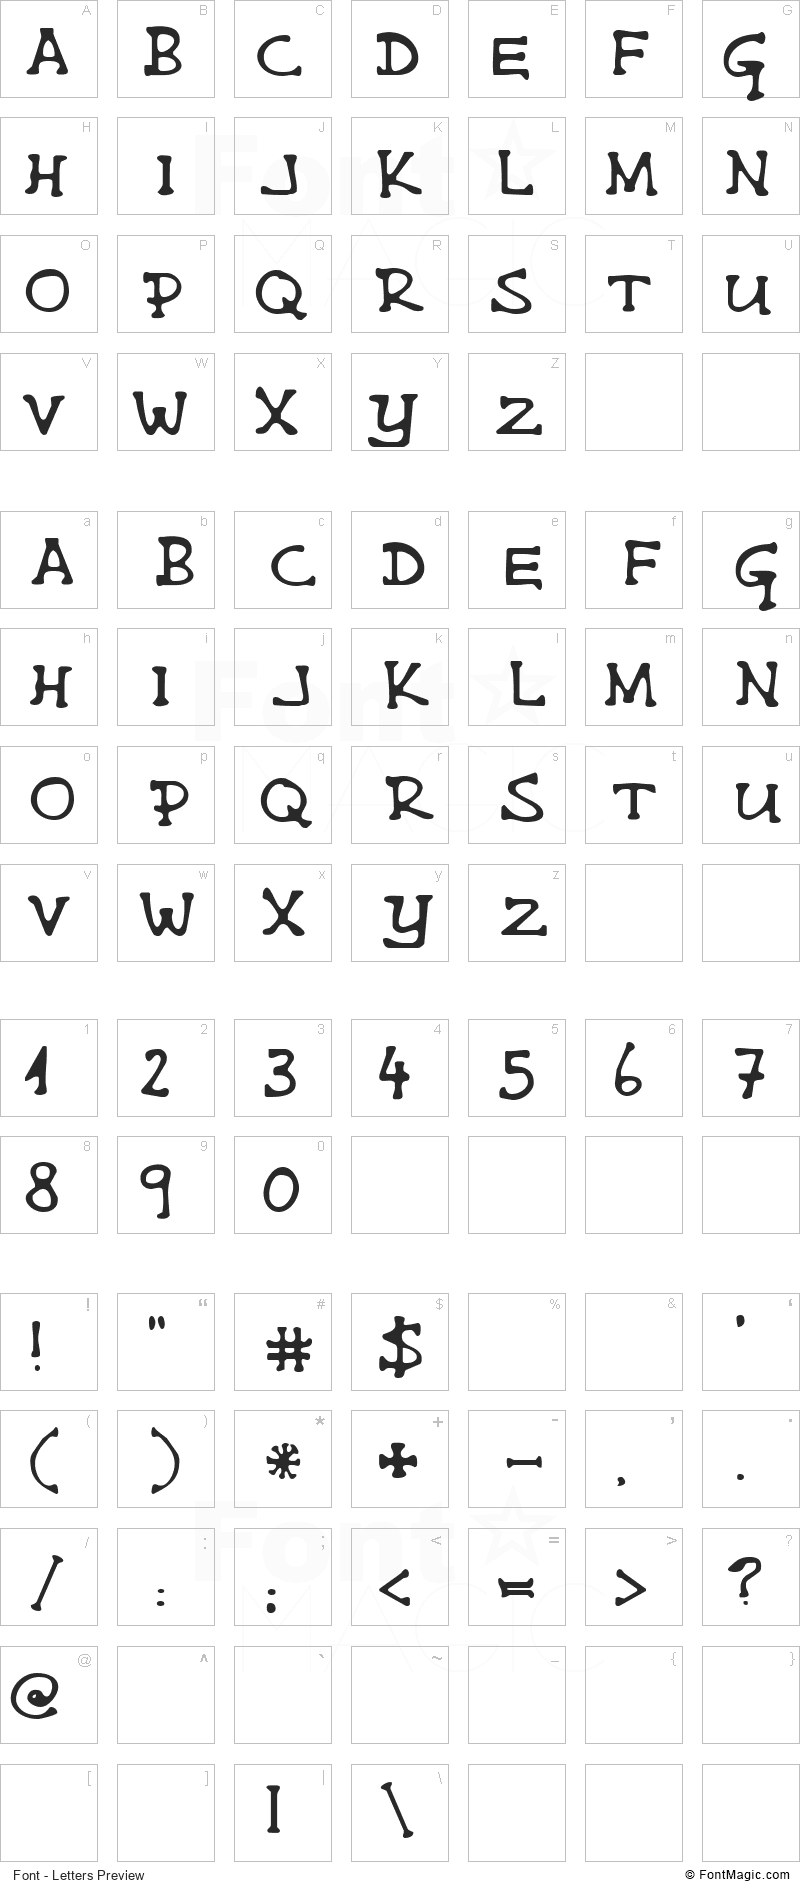 Single Malta Font - All Latters Preview Chart